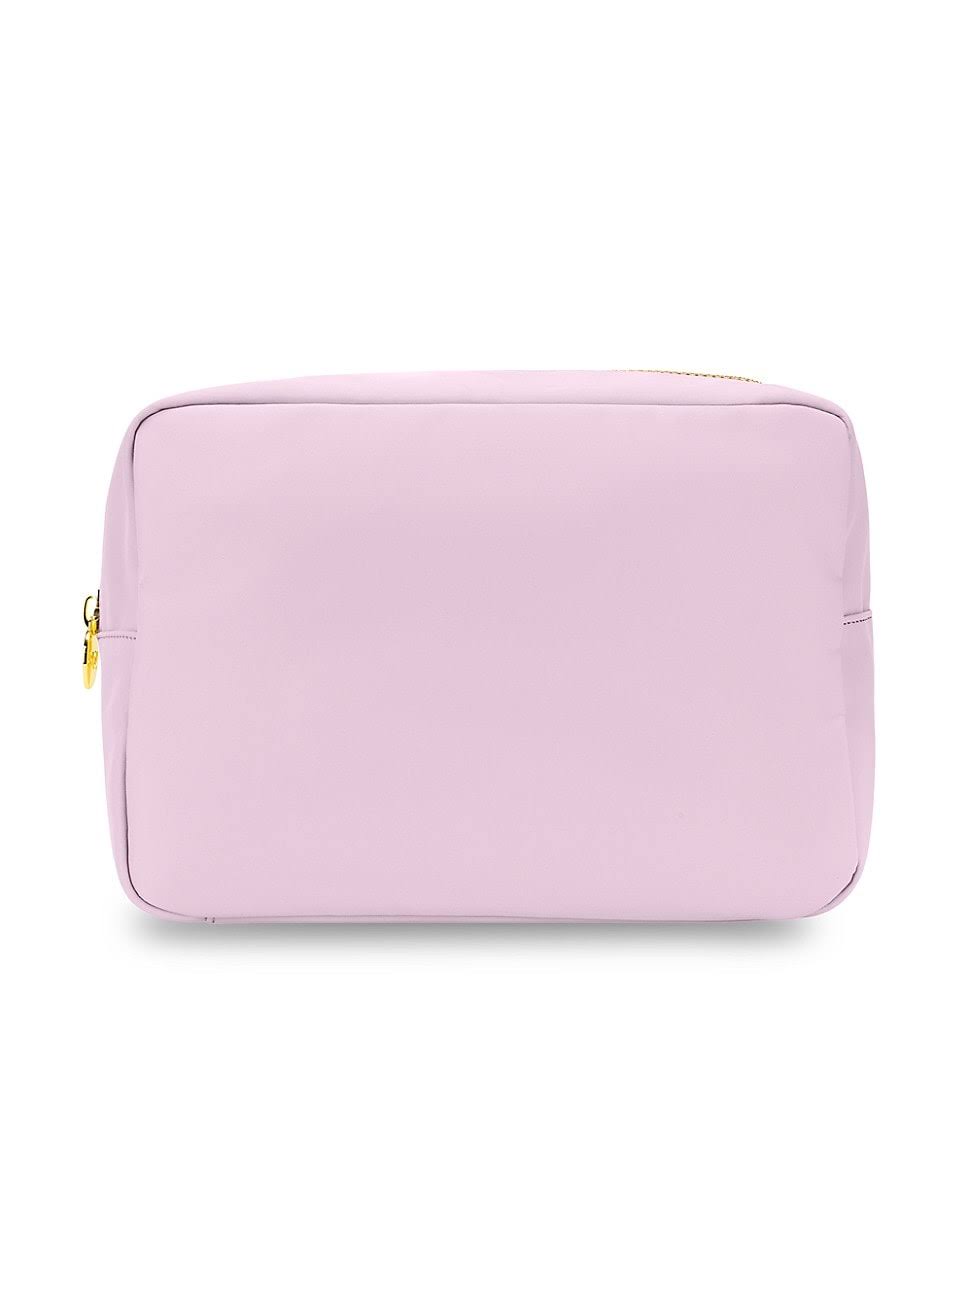 Stoney Clover Lane Classic Large Pouch in Lilac - Purple. Size all.